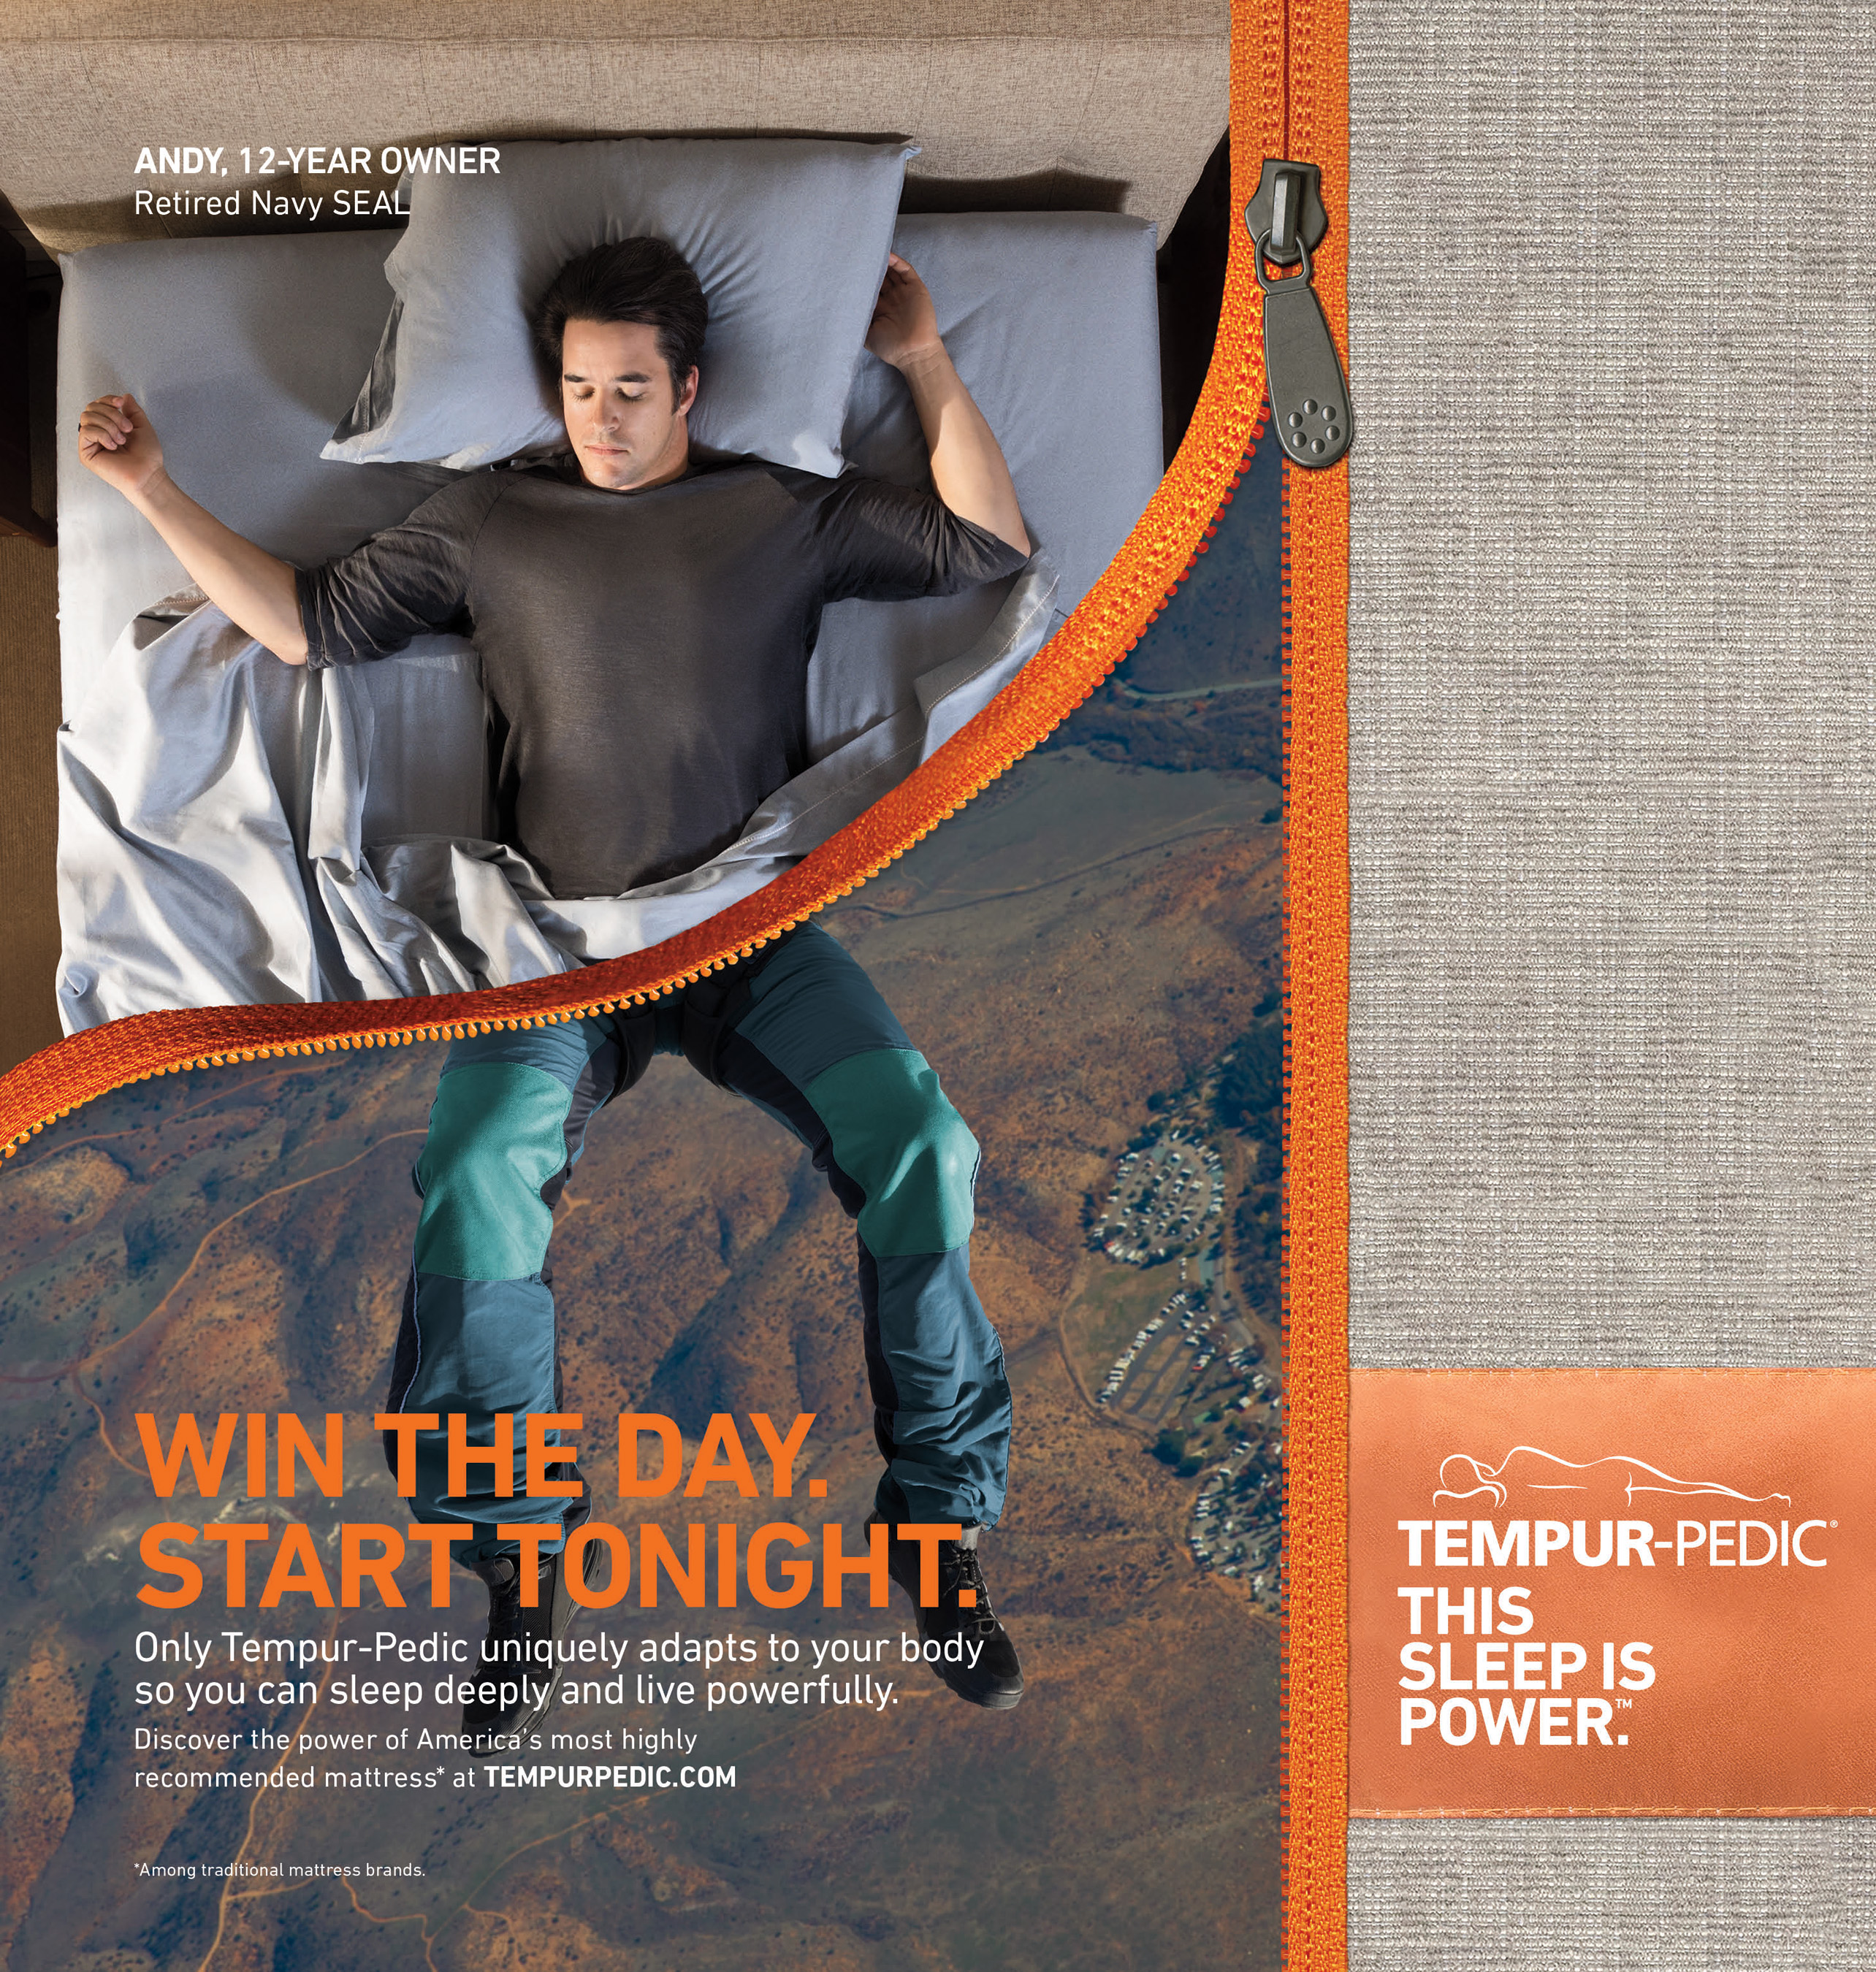 The “Tempur-Pedic Sleep Is Power” campaign seamlessly links how individuals spend their nights – on their Tempur-Pedic mattresses – and their days training, running, surfing and living at peak performance. Here, Andy Stumpf, 12-year owner and former Navy SEAL is highlighted in one of the campaign’s print ads. 